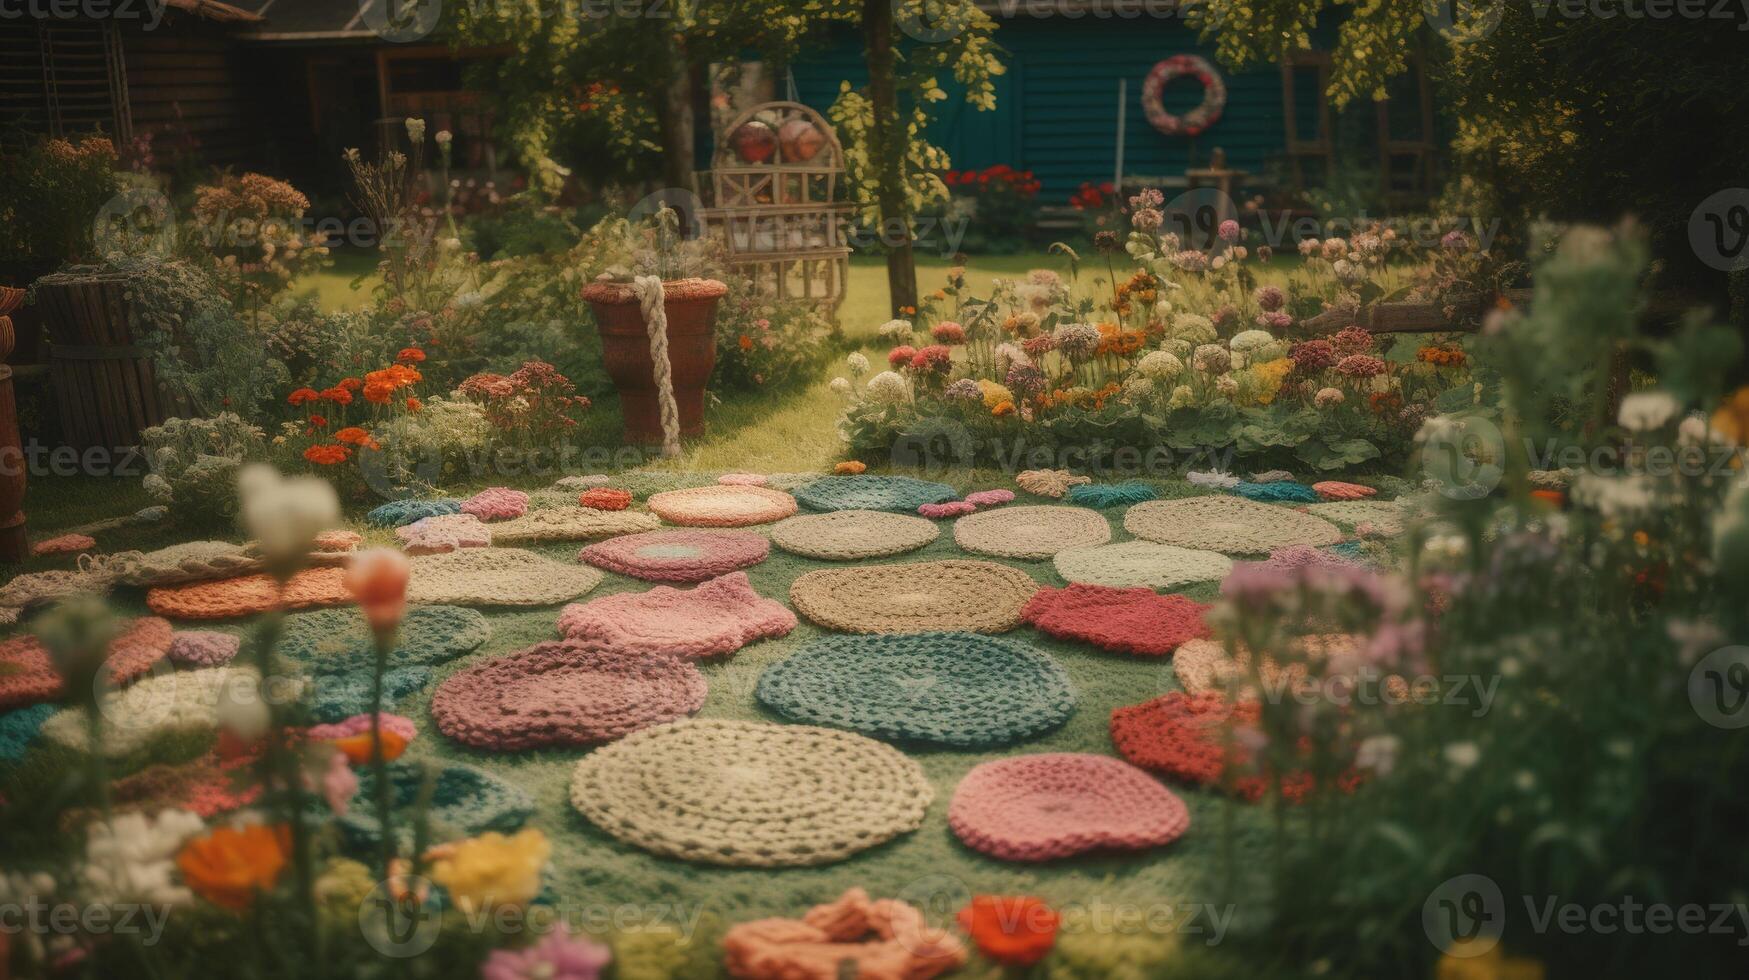 , cute garden made of crochet, plants, trees, flowers. Soft colors, dreamy scene landscape made of crochet materials, wool, fabric, yarn, sewing for background photo